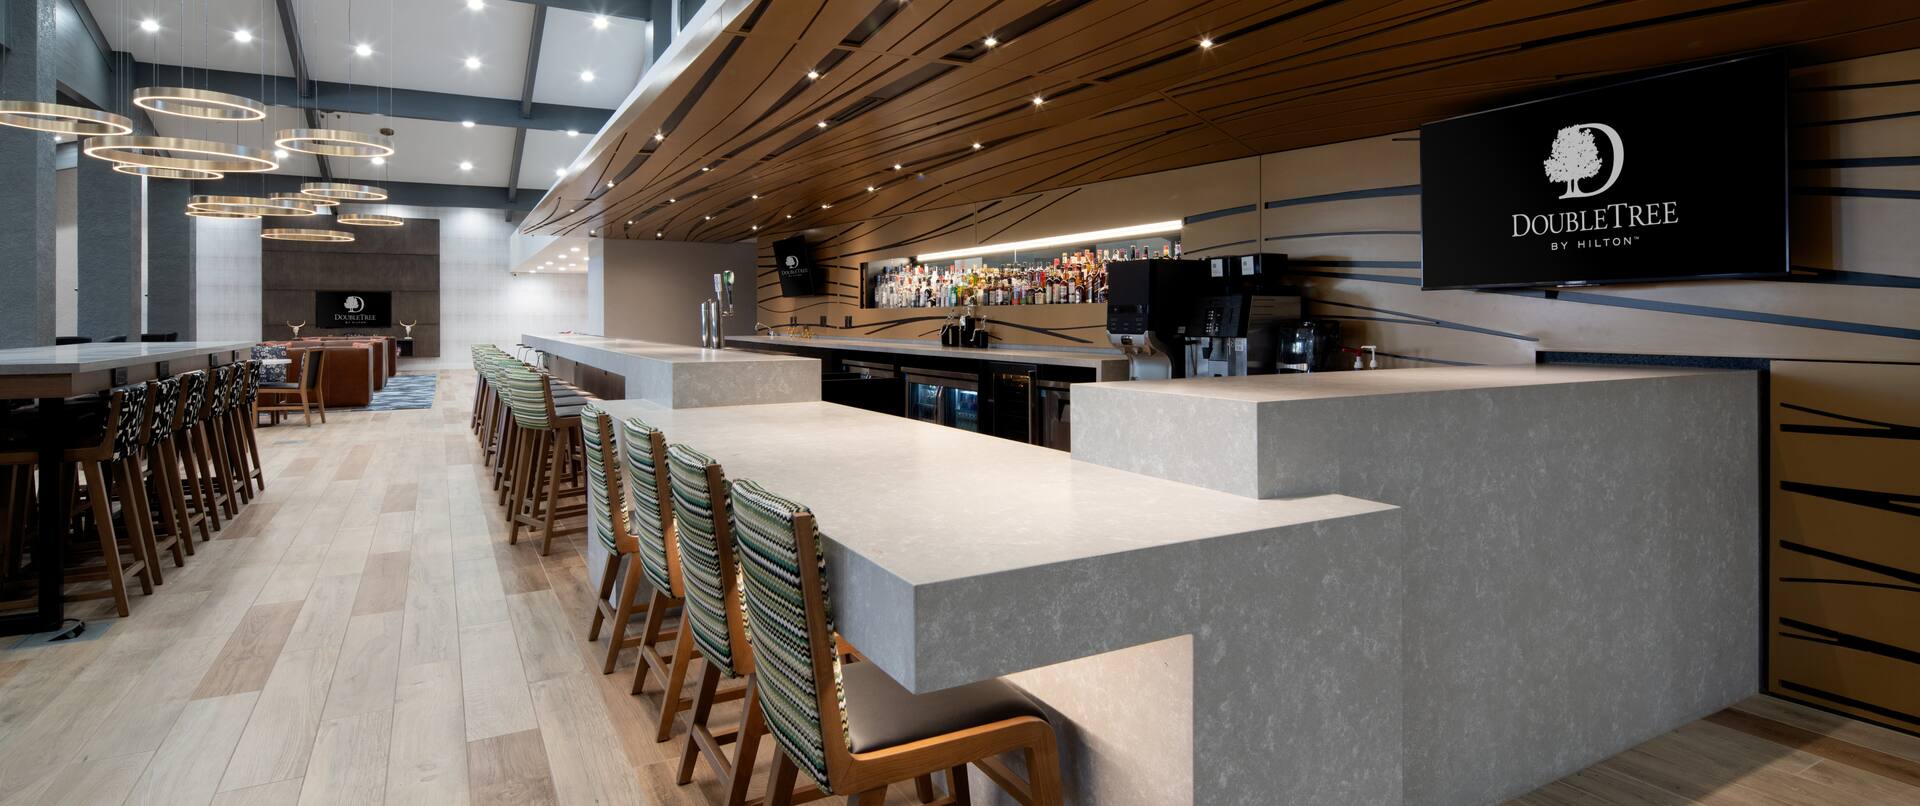 DoubleTree Bar and Lounge